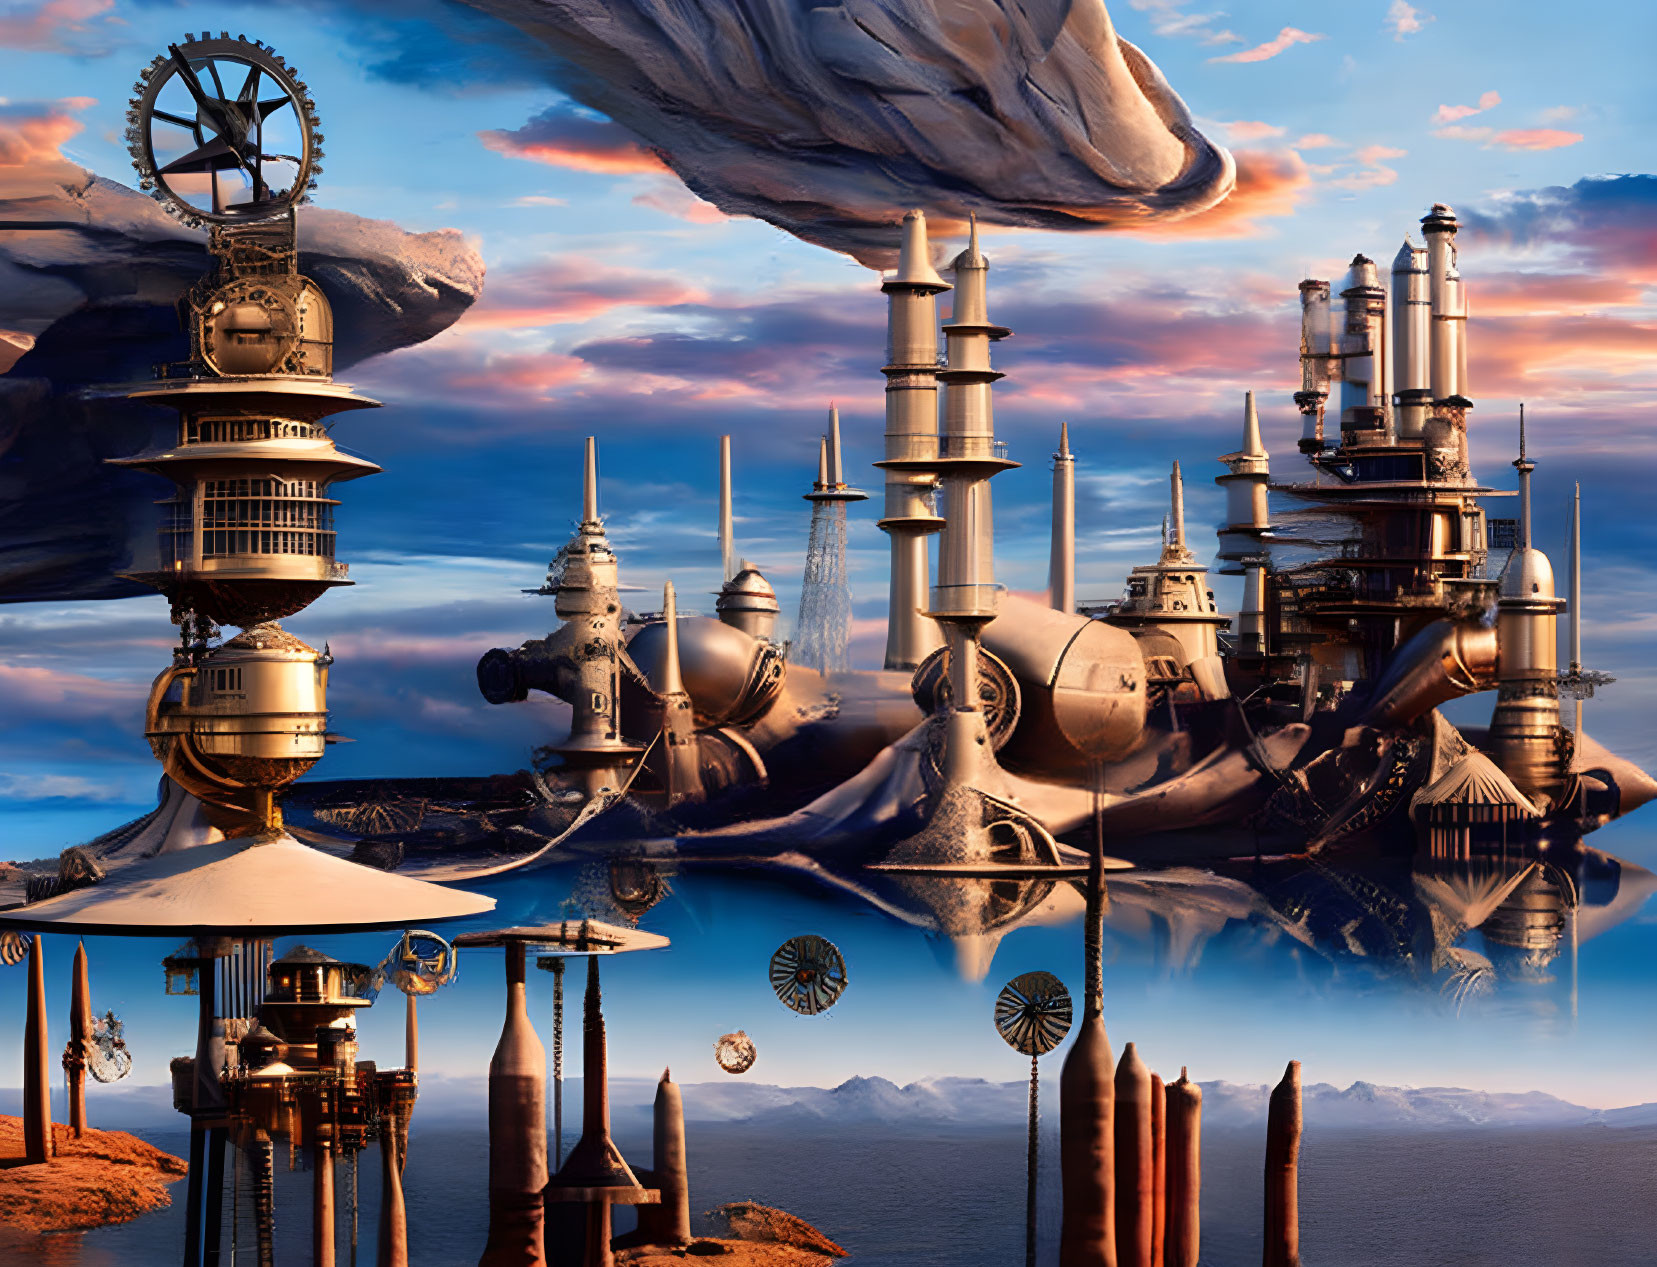 Steampunk cityscape with ornate towers and floating islands at sunset